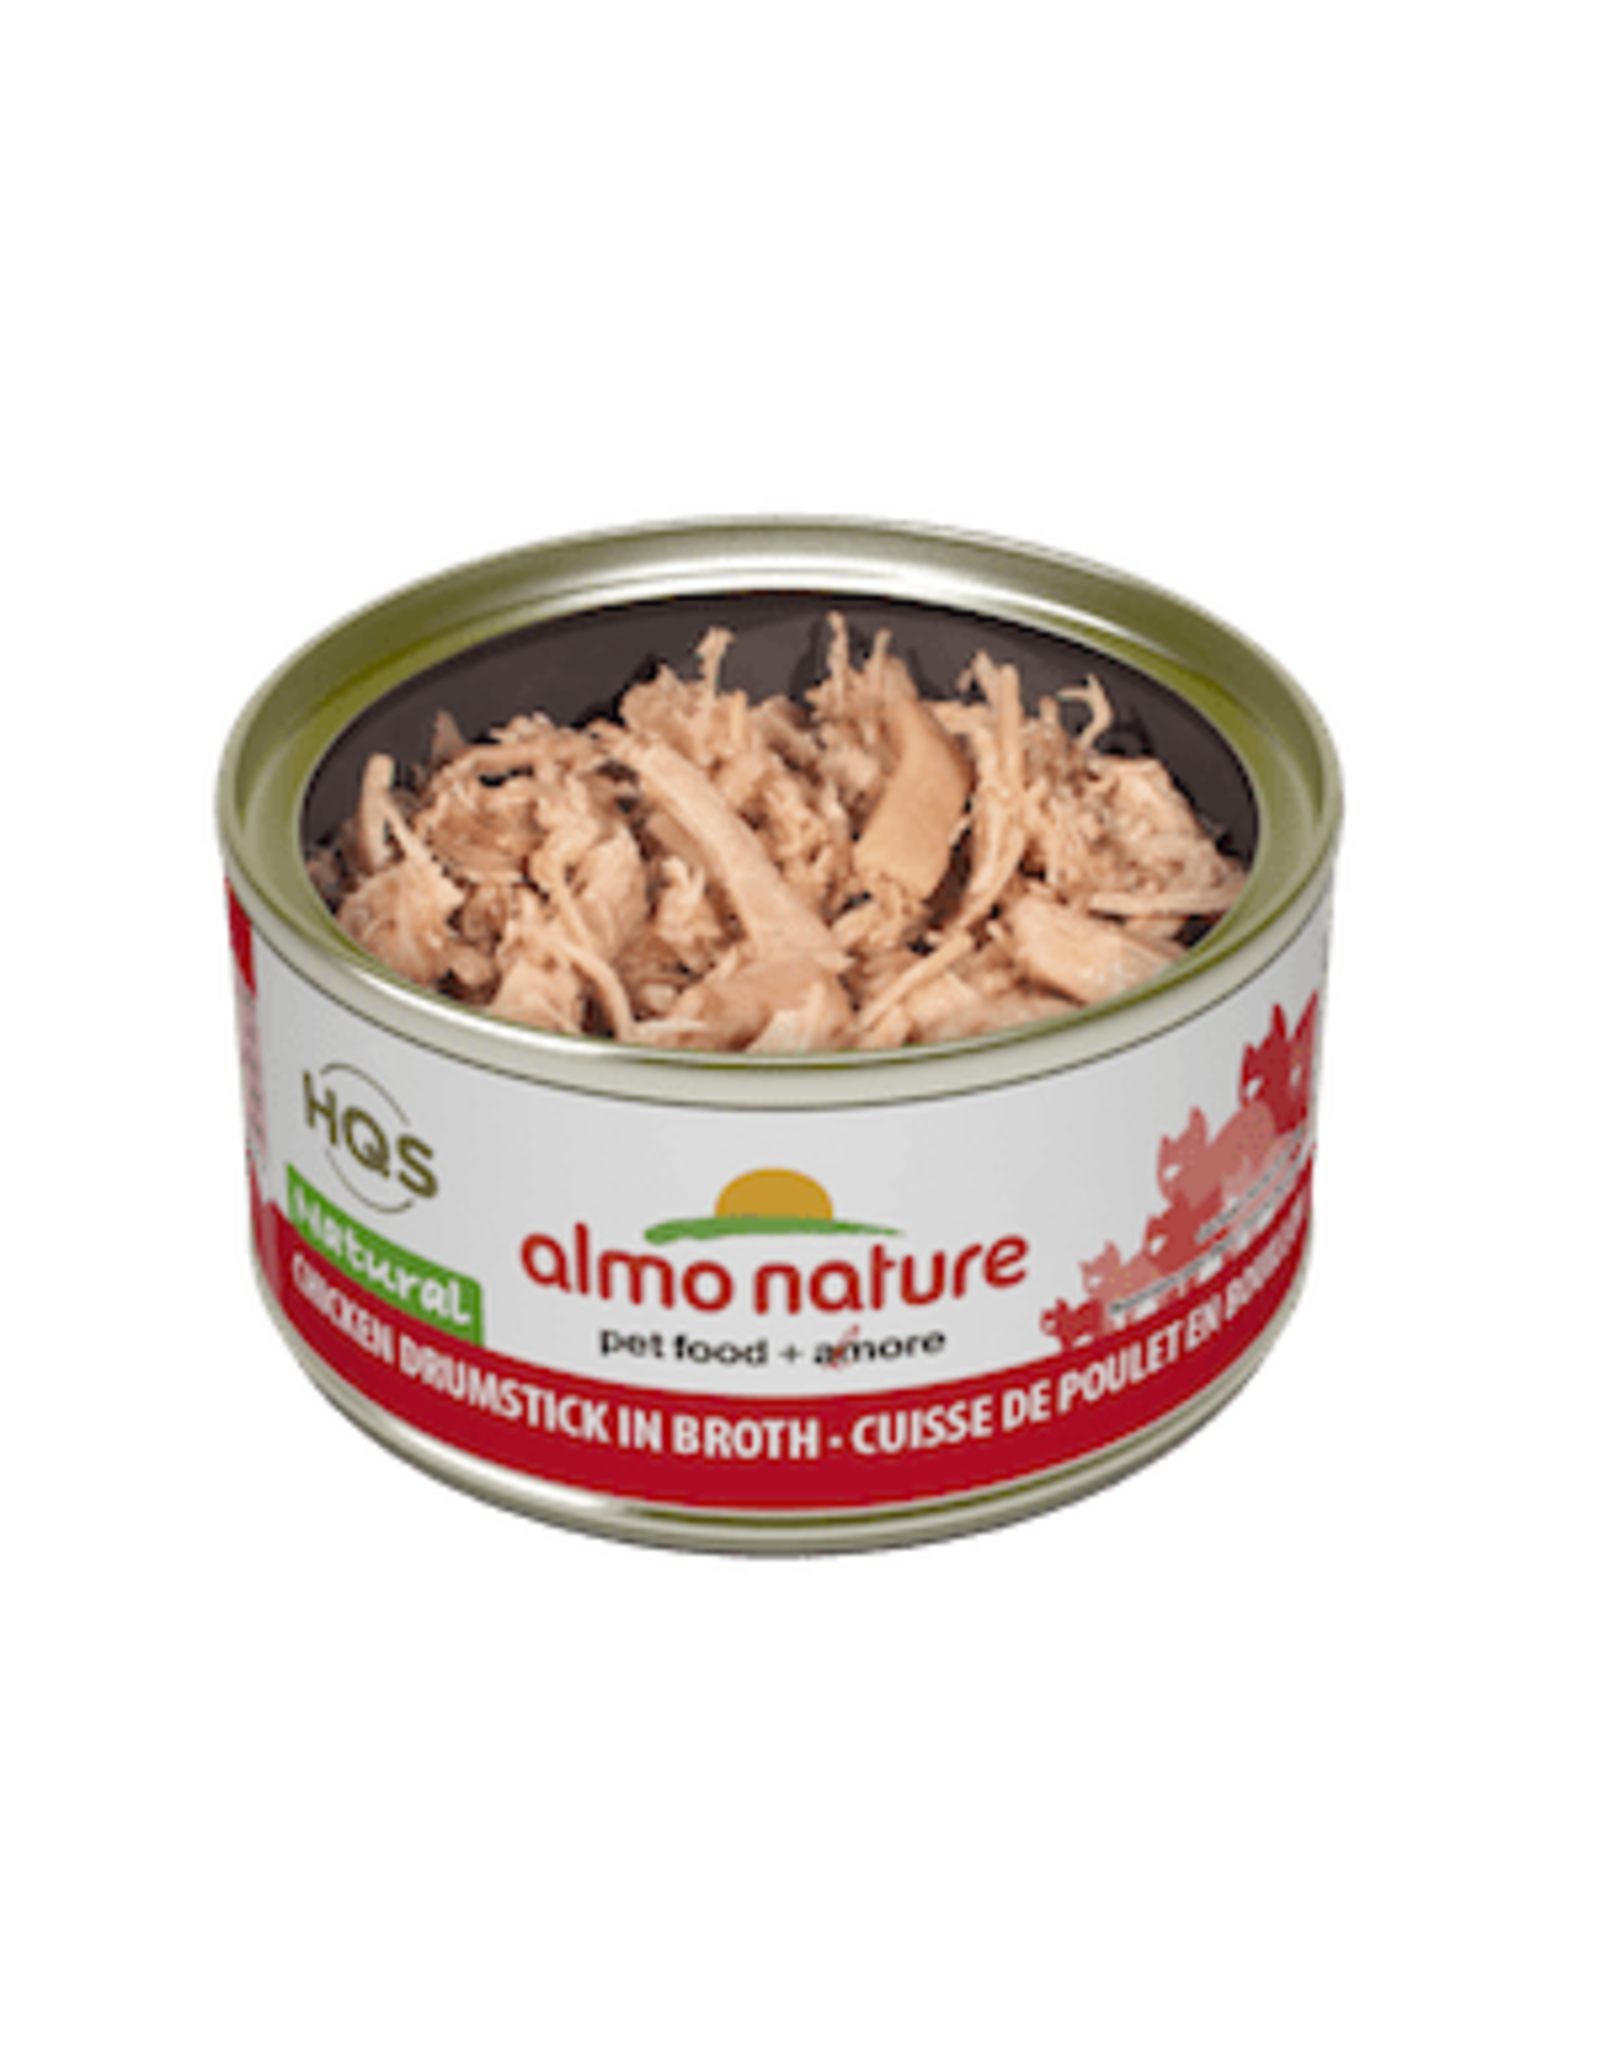 Almo Nature Almo Nature HQS Natural Chicken Drumstick in Broth Cat Food 2.47oz